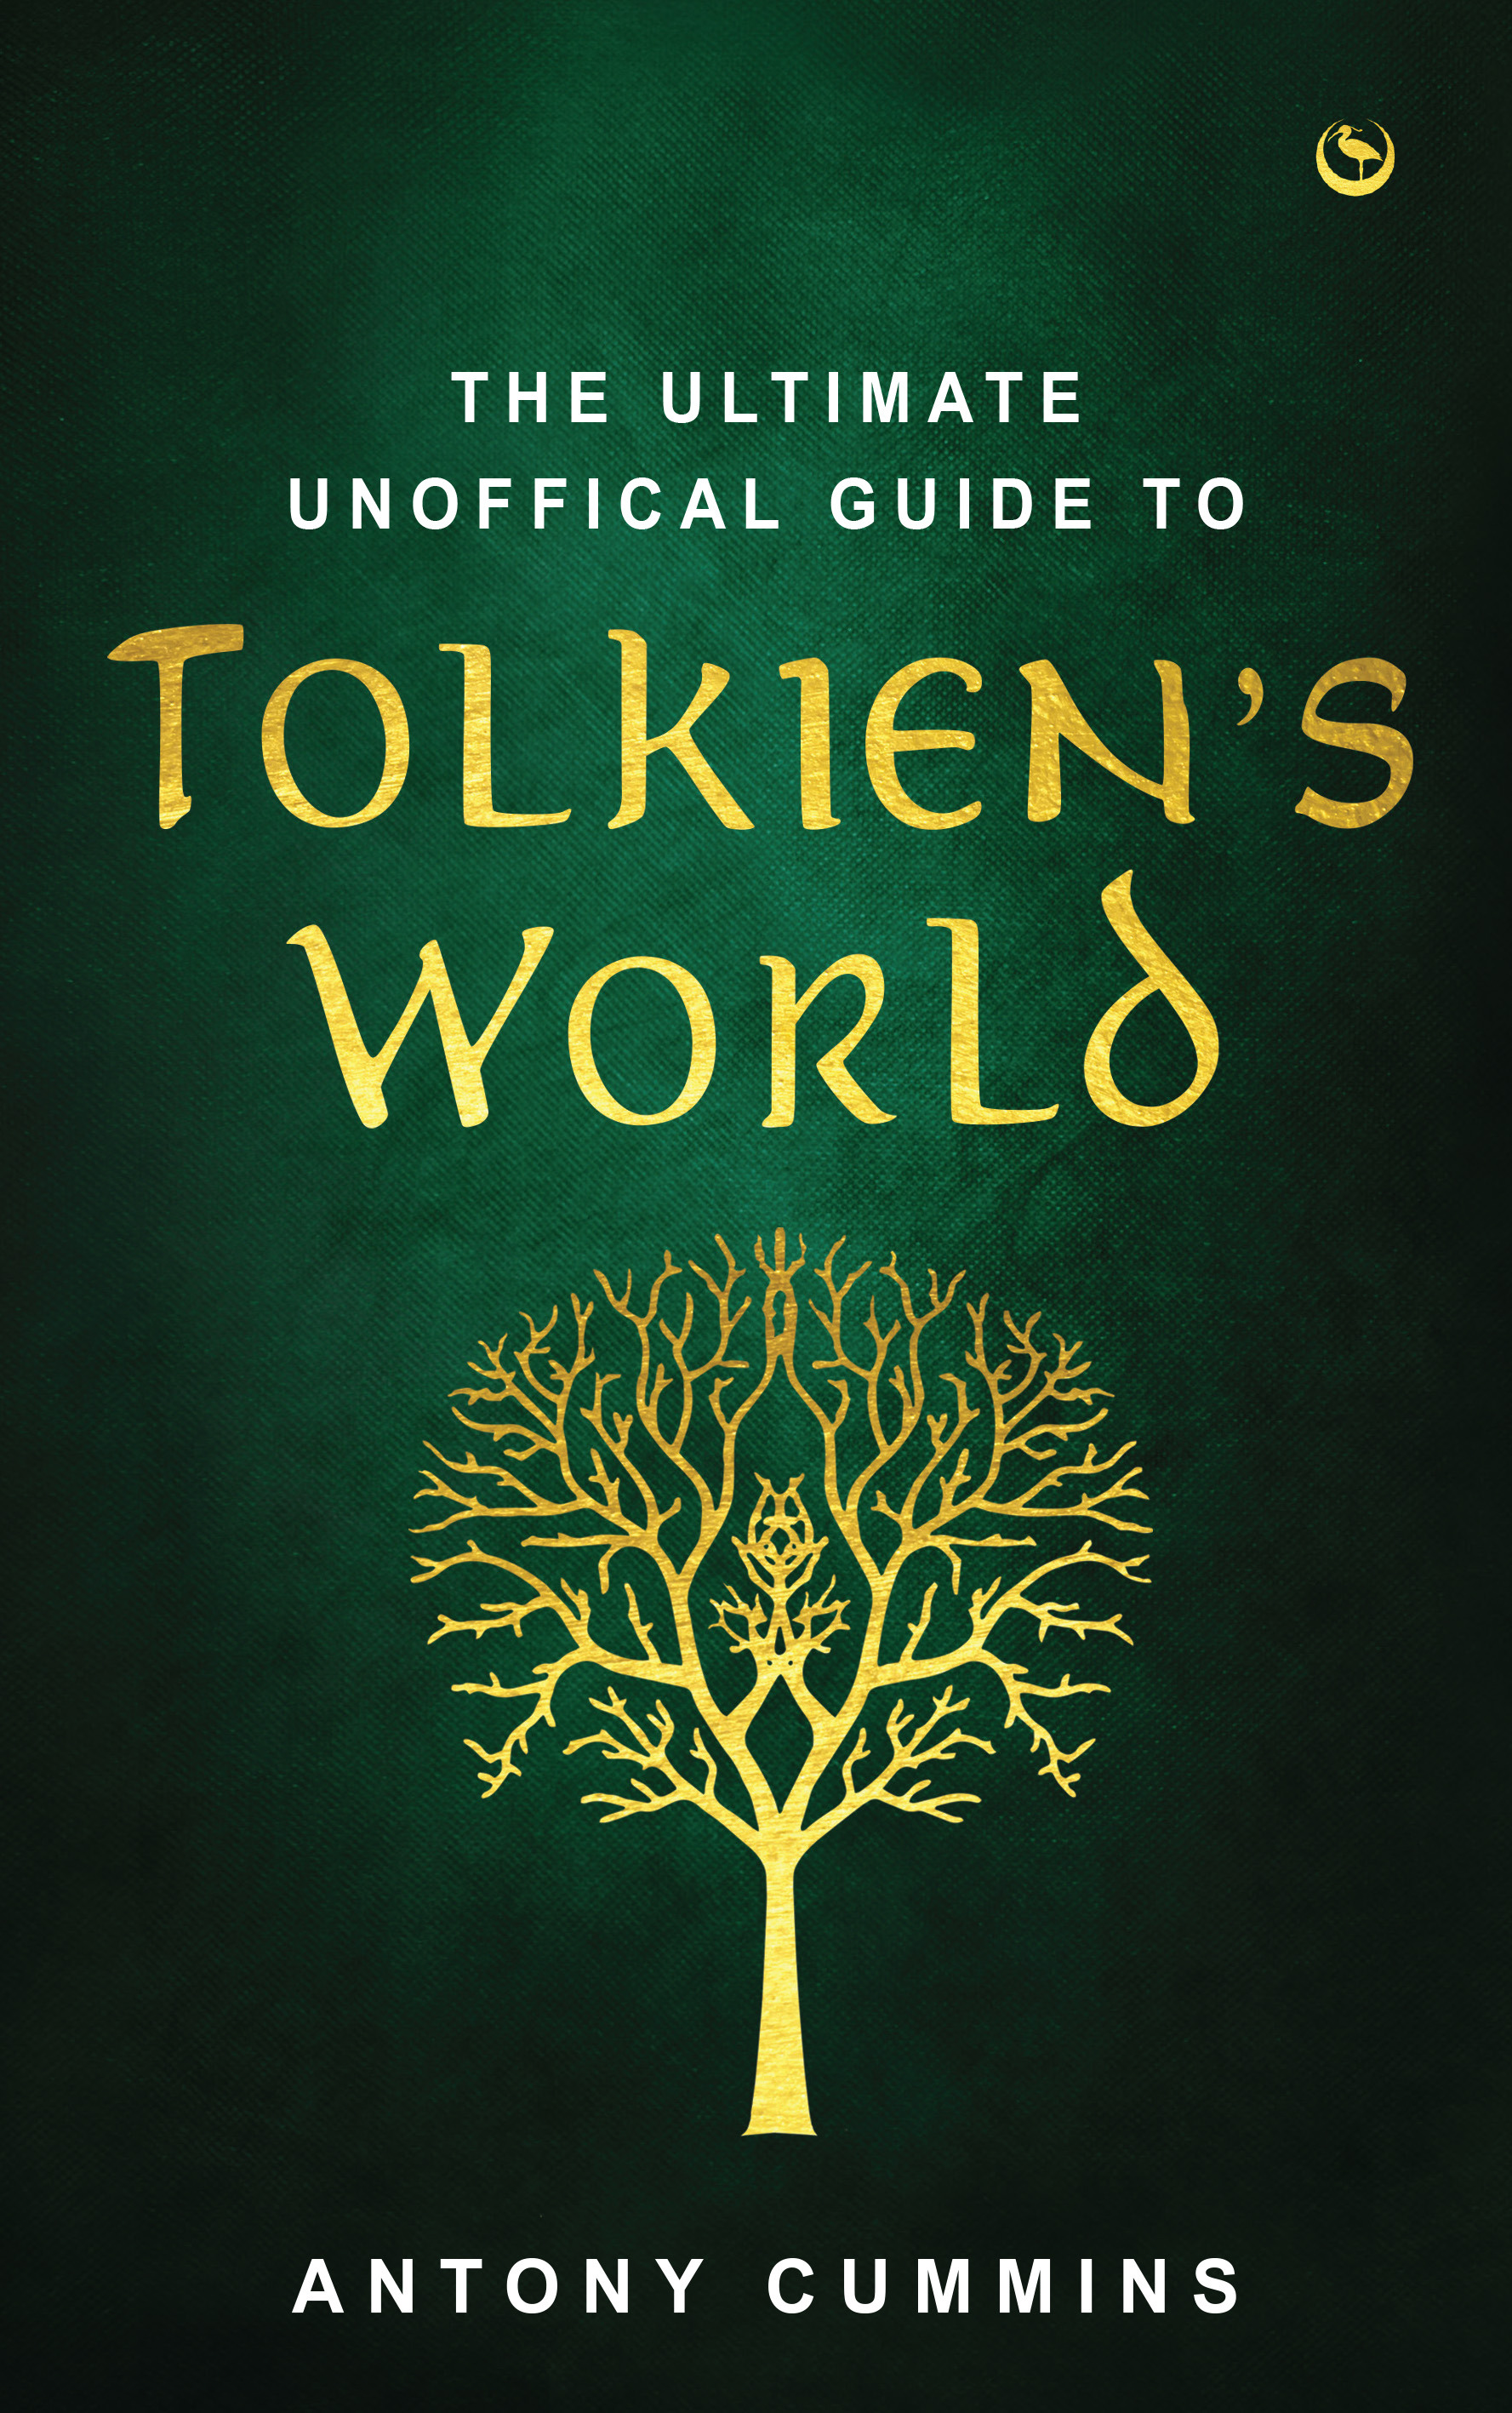 The Ultimate Unofficial Guide to Tolkien's World | Cummins, Antony (Auteur)